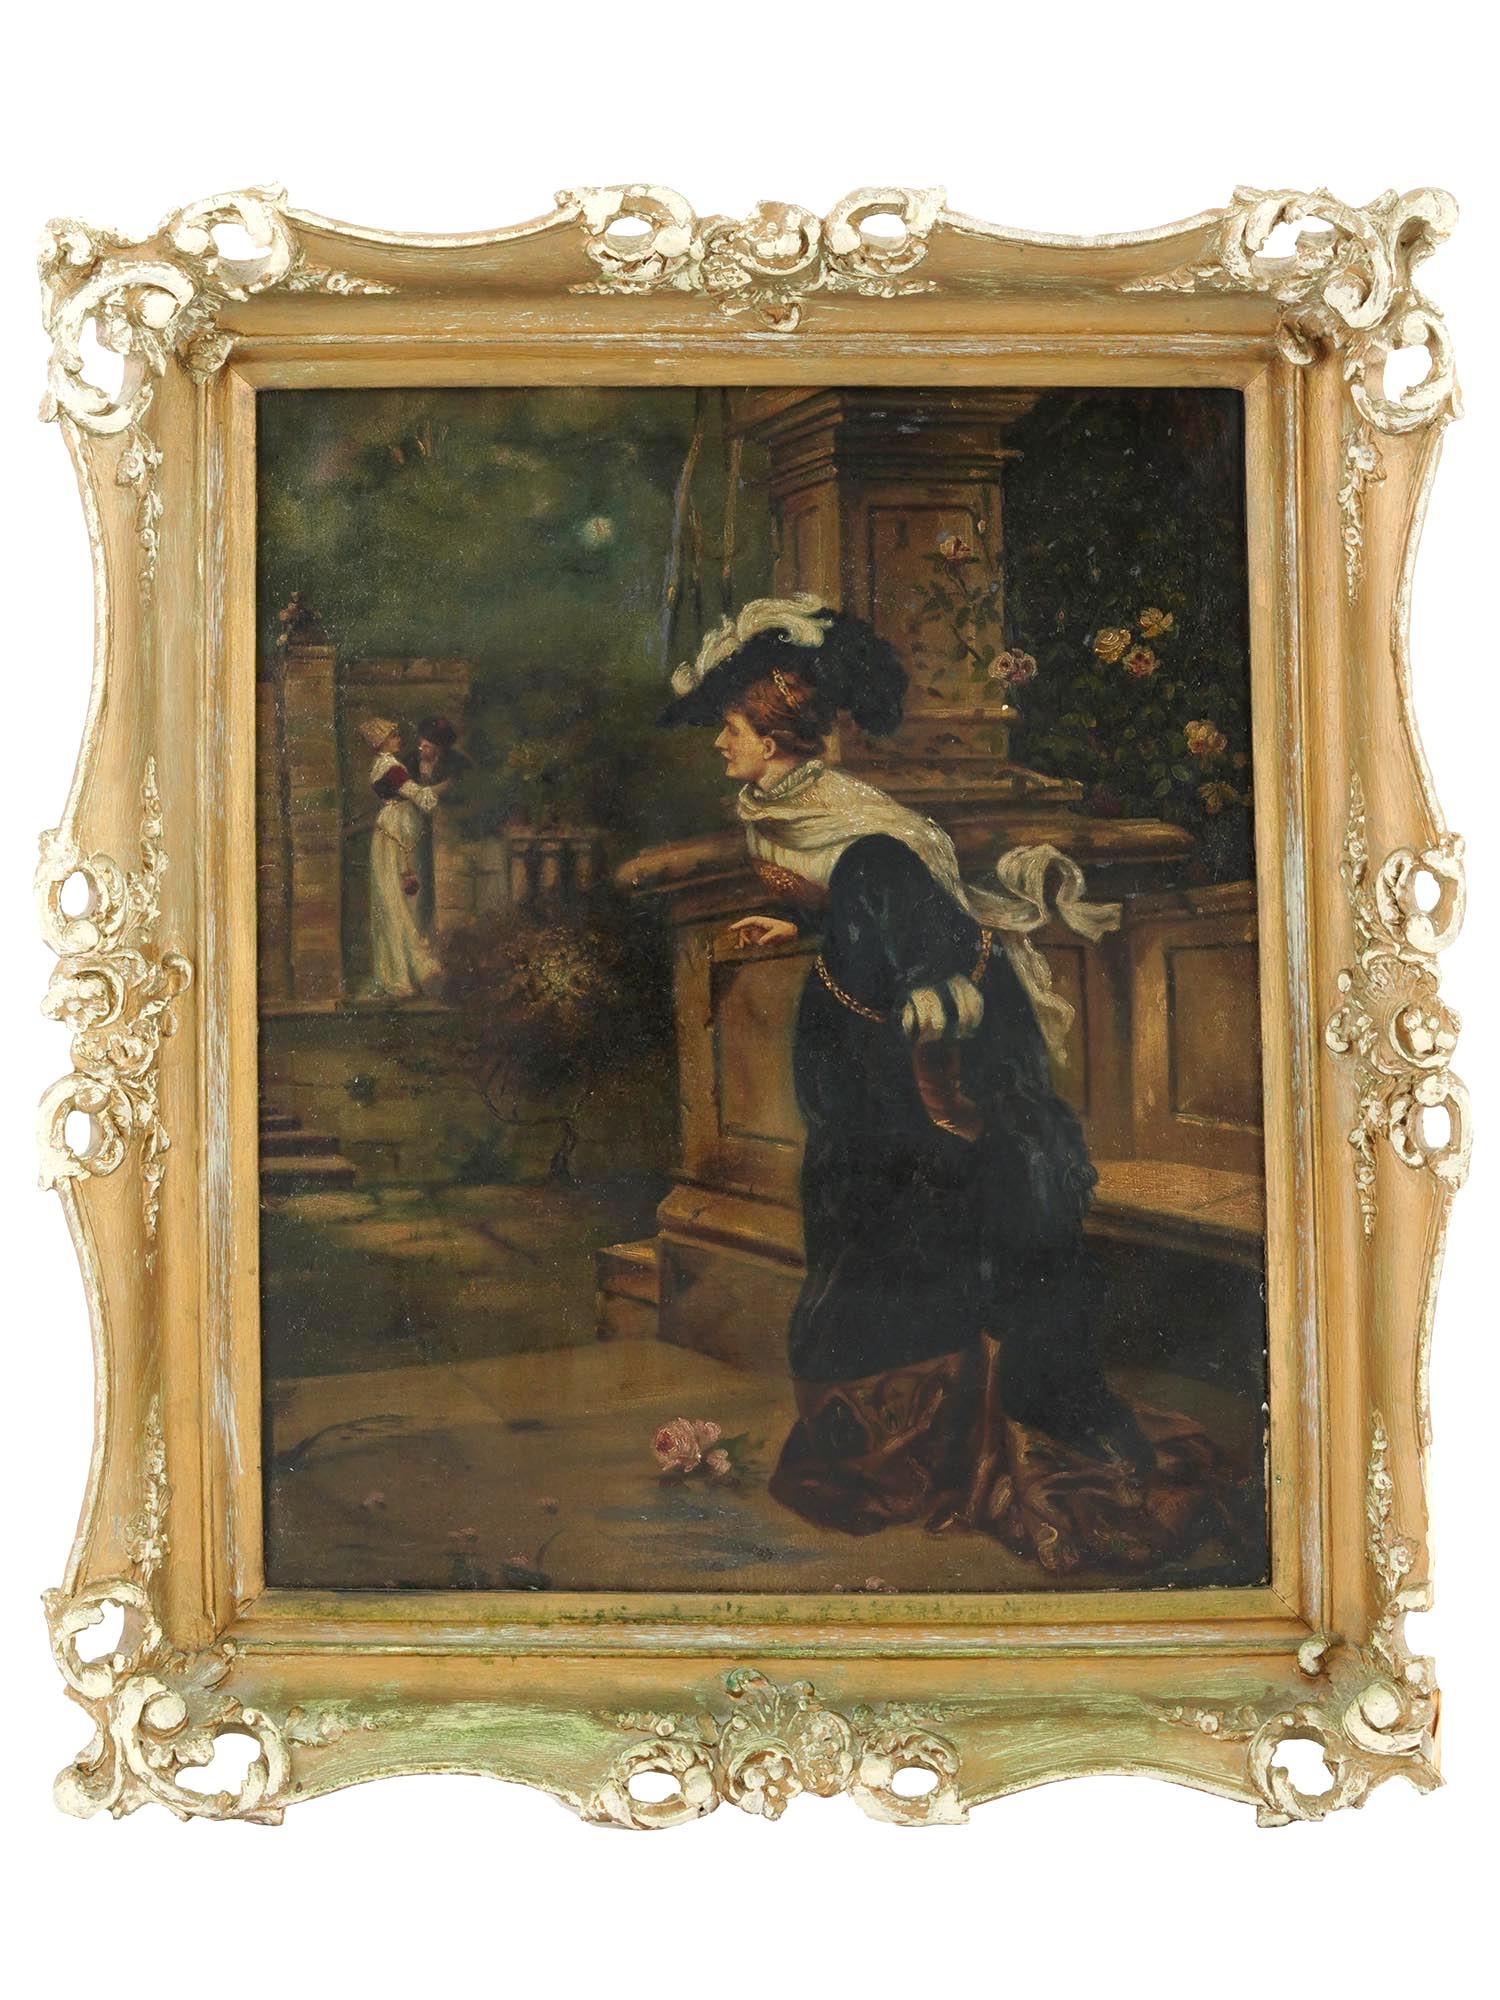 ANTIQUE 19TH C LOVERS GARDEN SCENE OIL PAINTING PIC-0